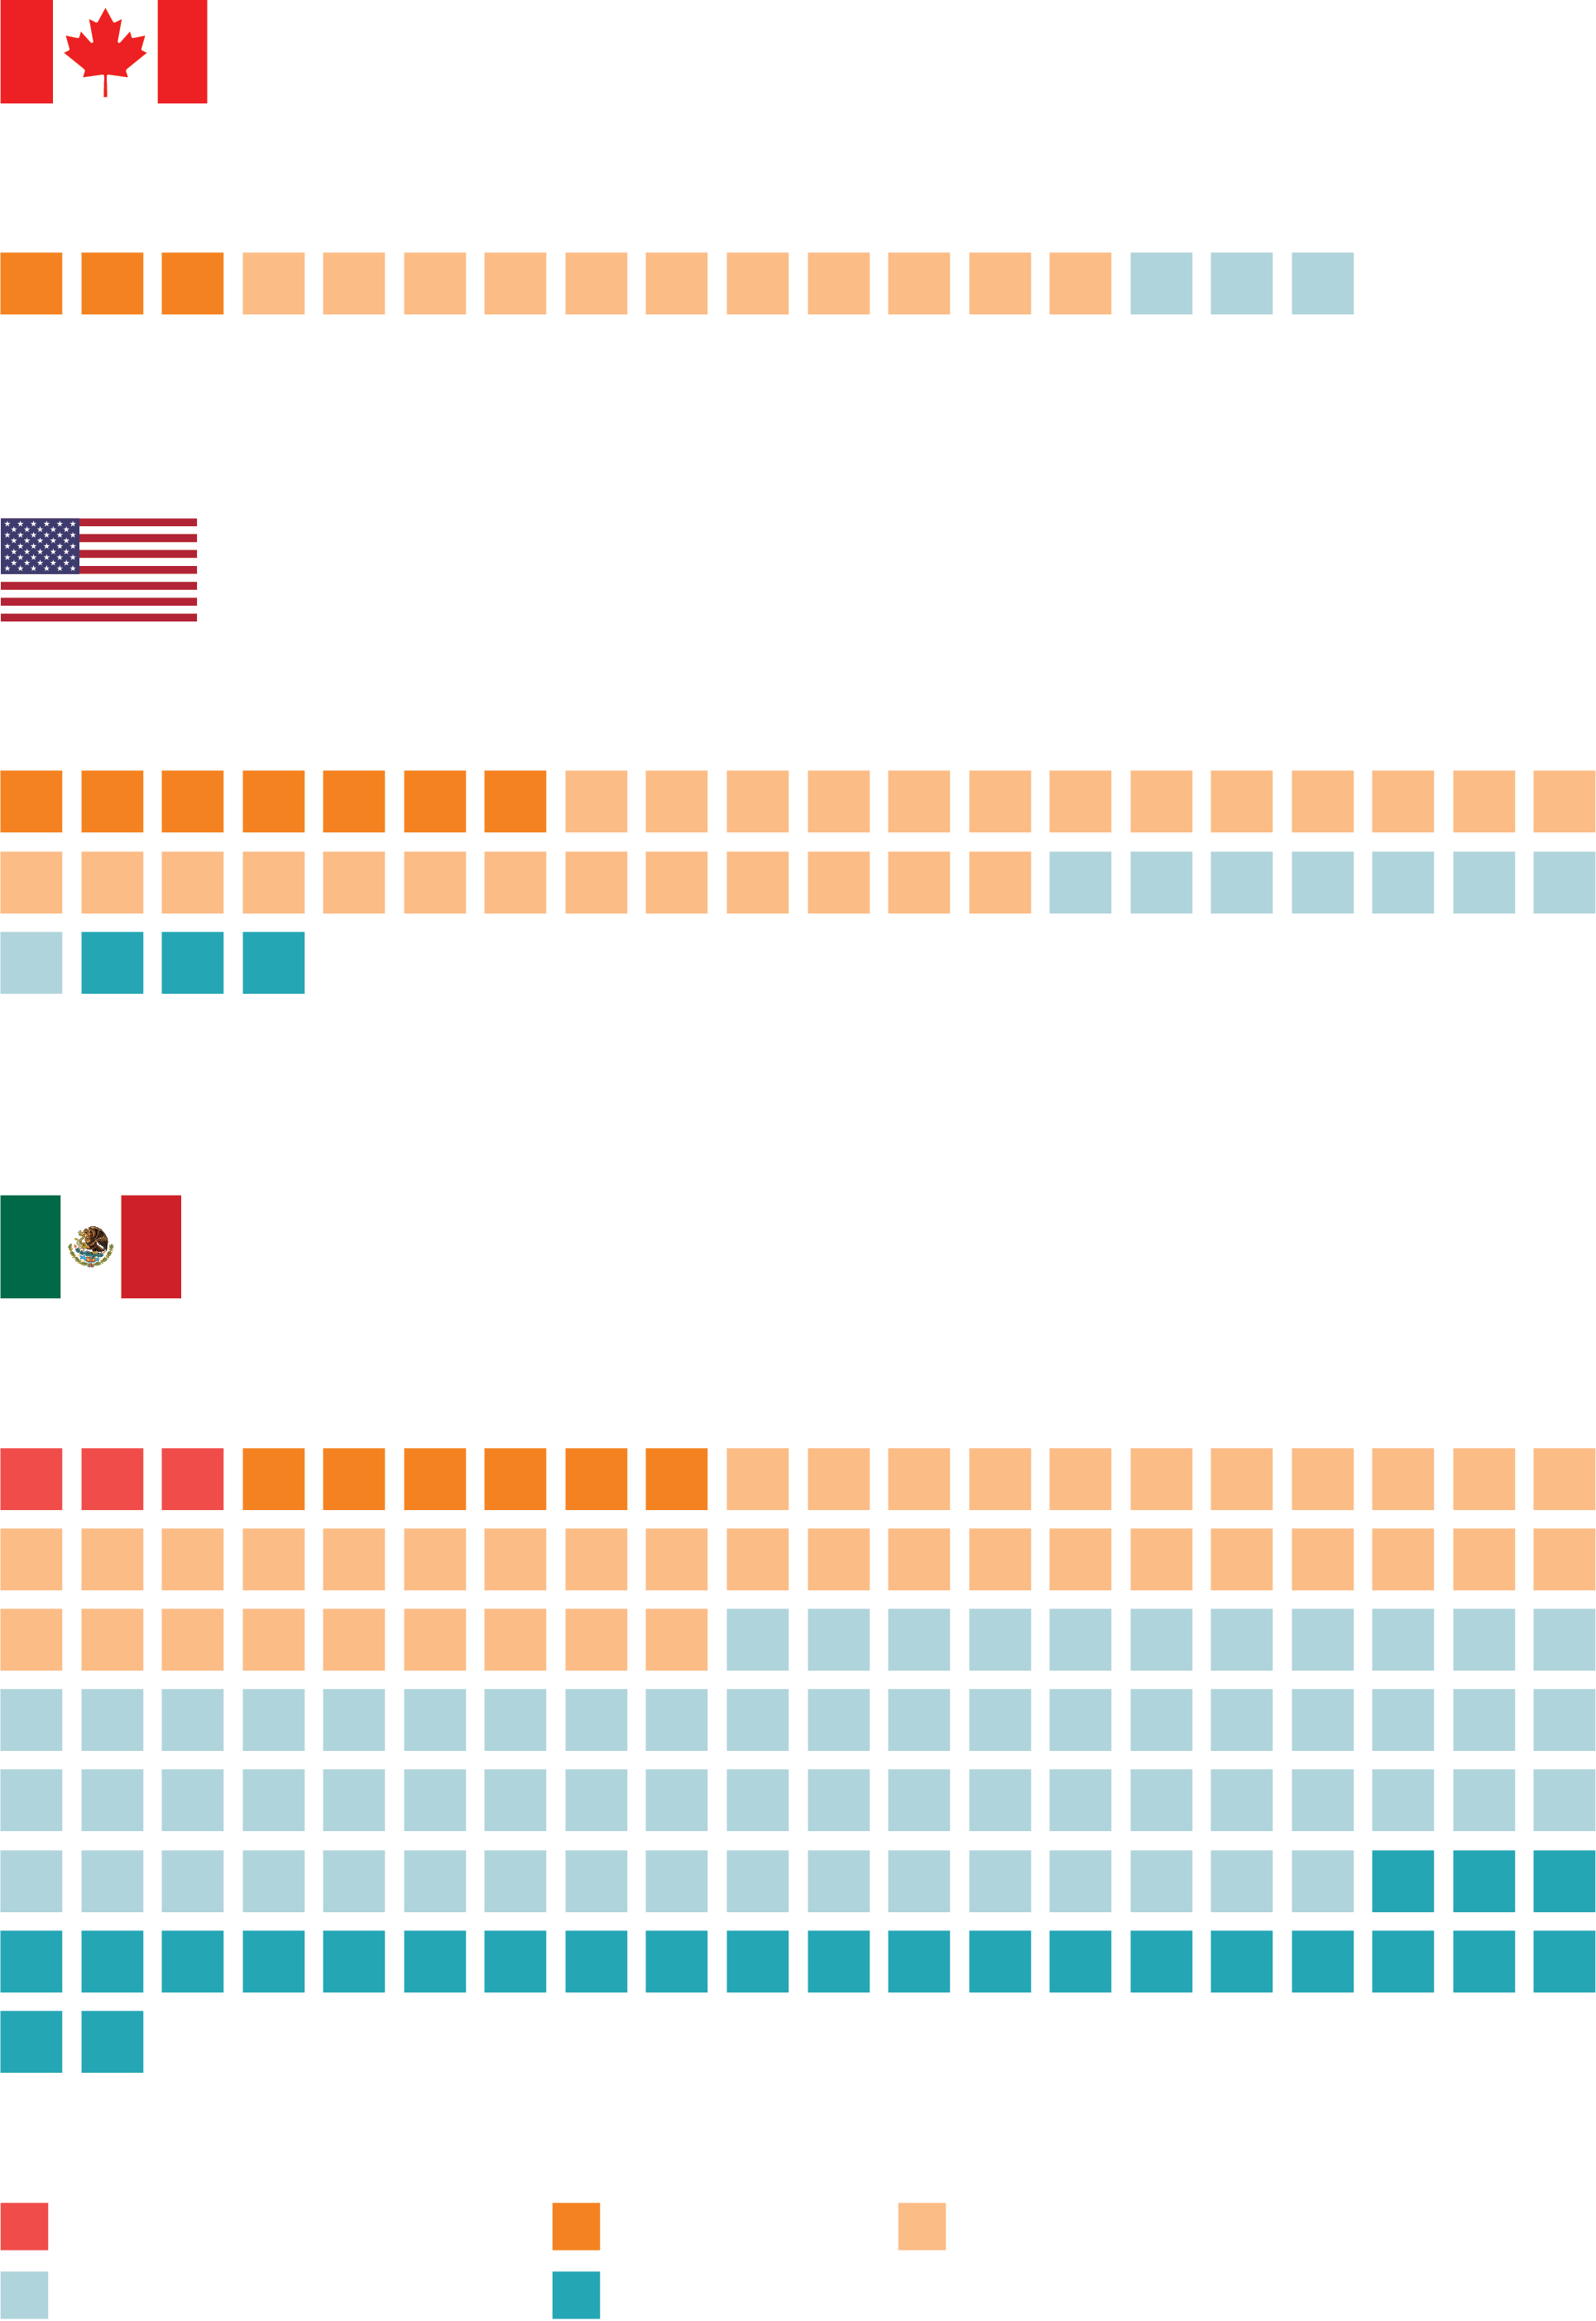 Extinction Risk Table showing Canada, United States and Mexico